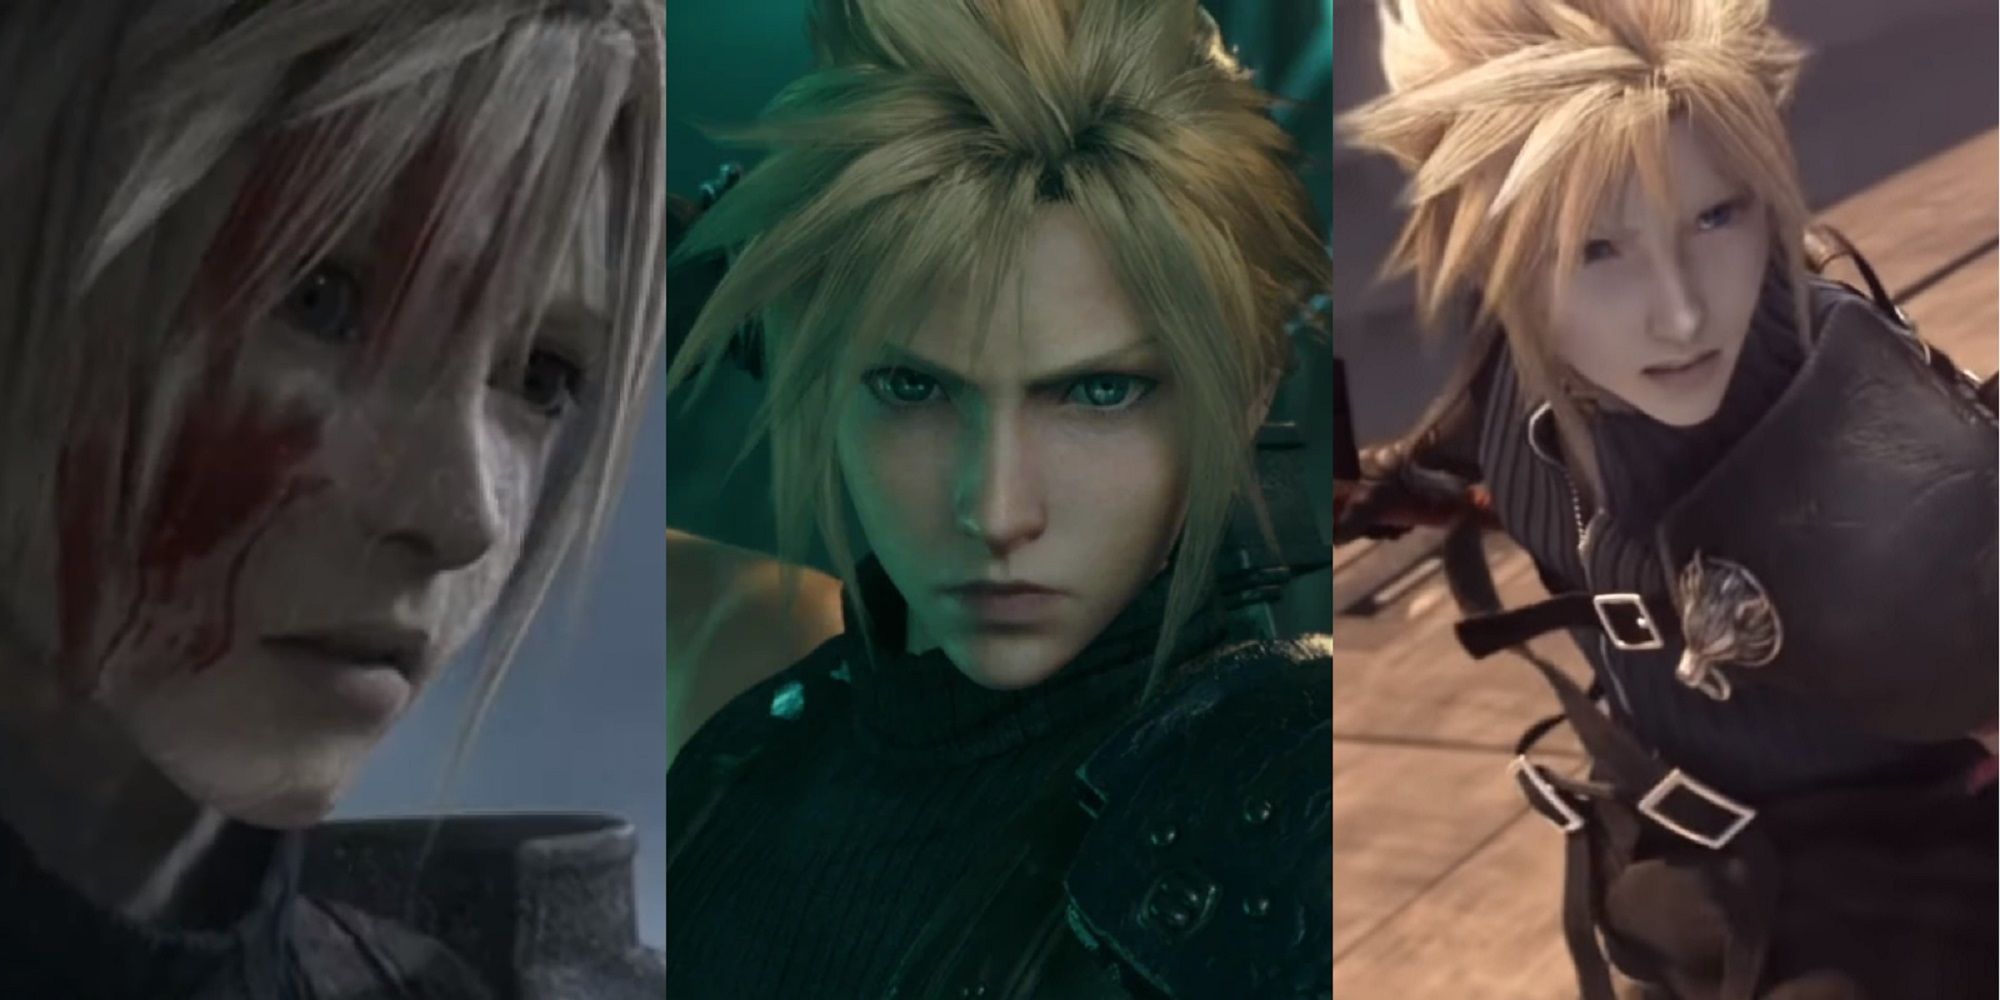 Split image of Cloud mourning Zack's Death in the original Crisis Core: Final Fantasy 7, his debut in the Final Fantasy 7 Remake, and a distressed Cloud fighting Sephiroth in Advent Children.